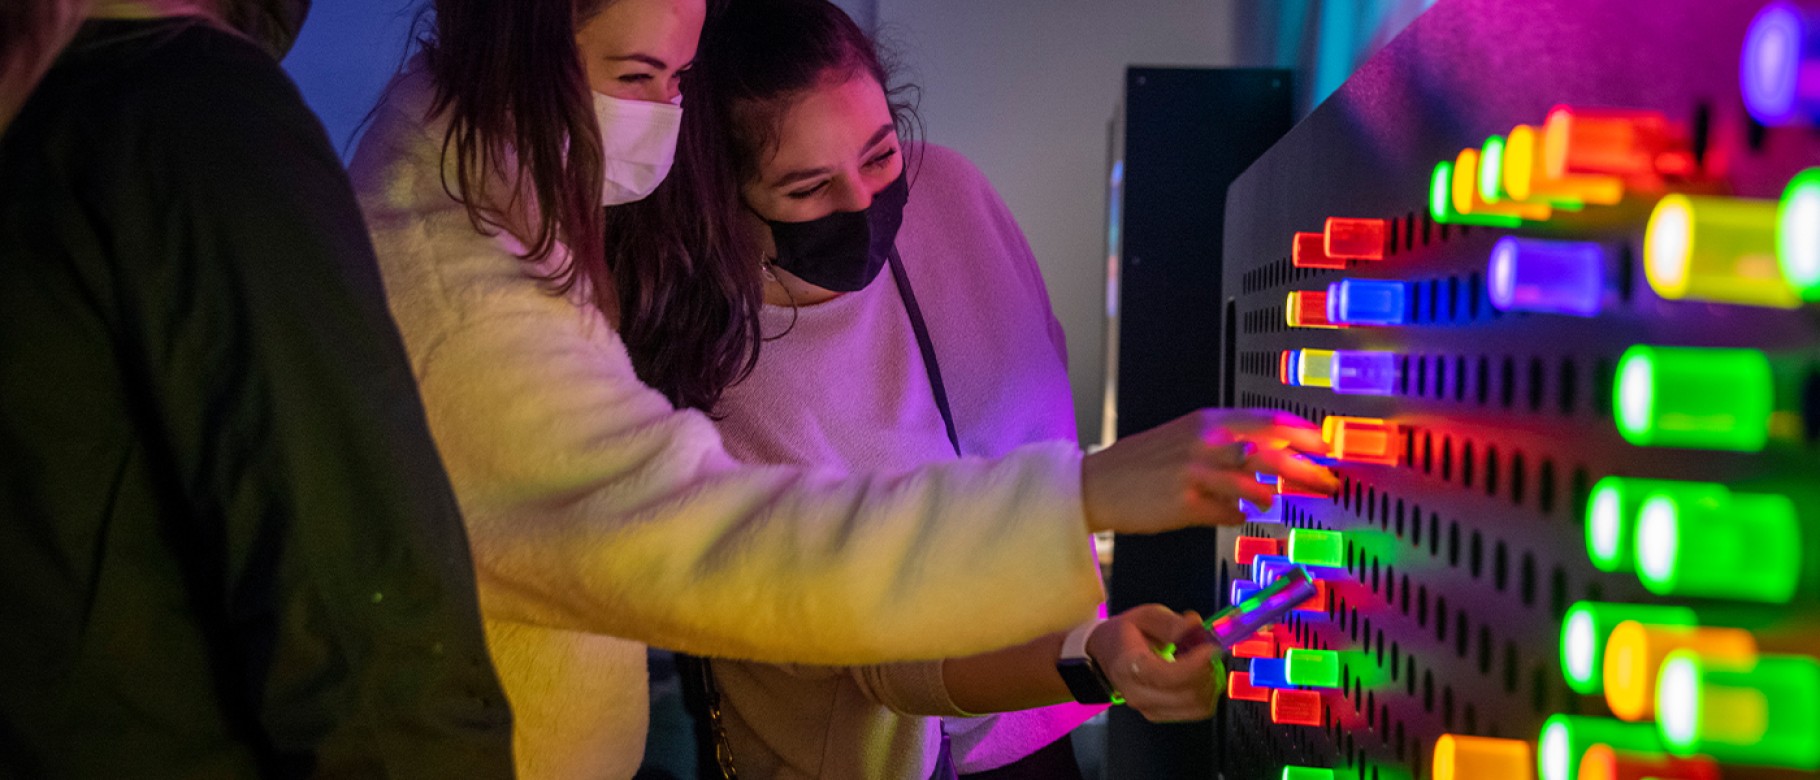 Students play with a giant "Lite Brite" at the children's museum